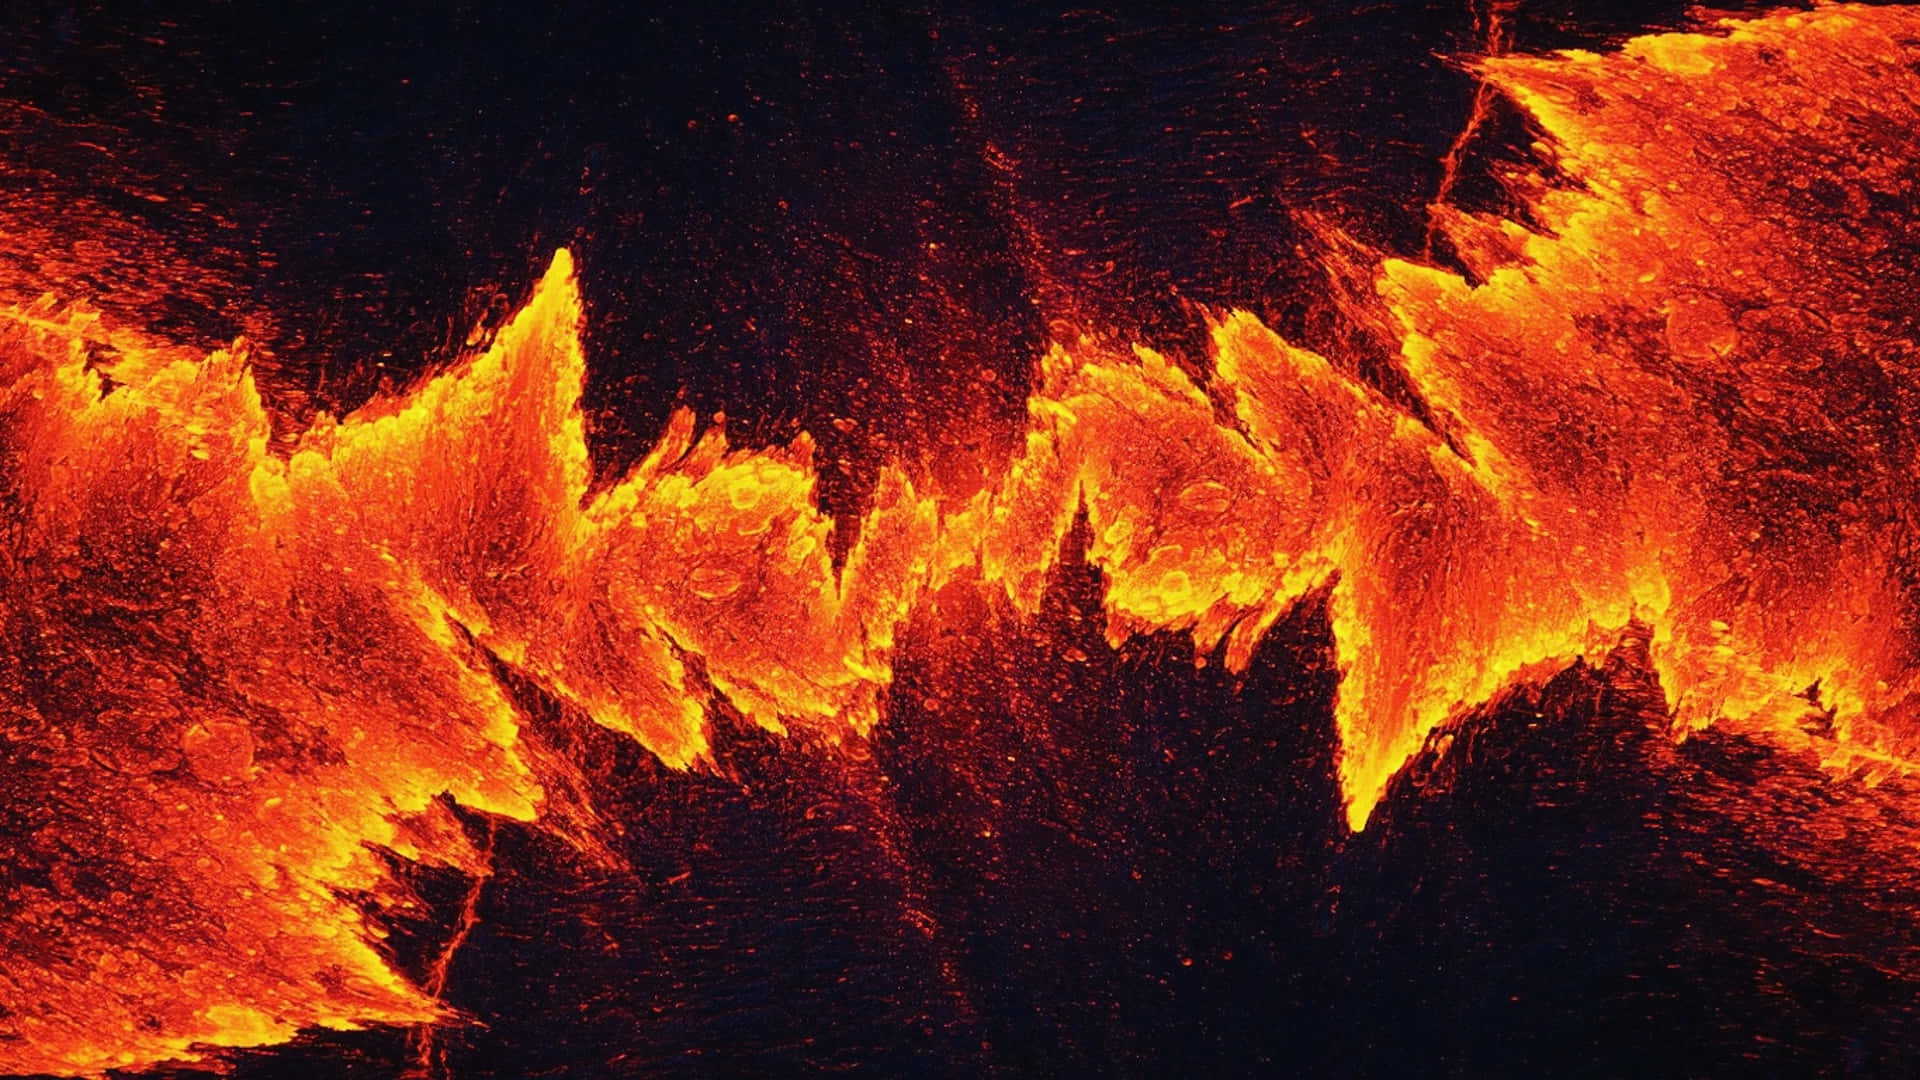 Download A Fire Wave With Orange Flames